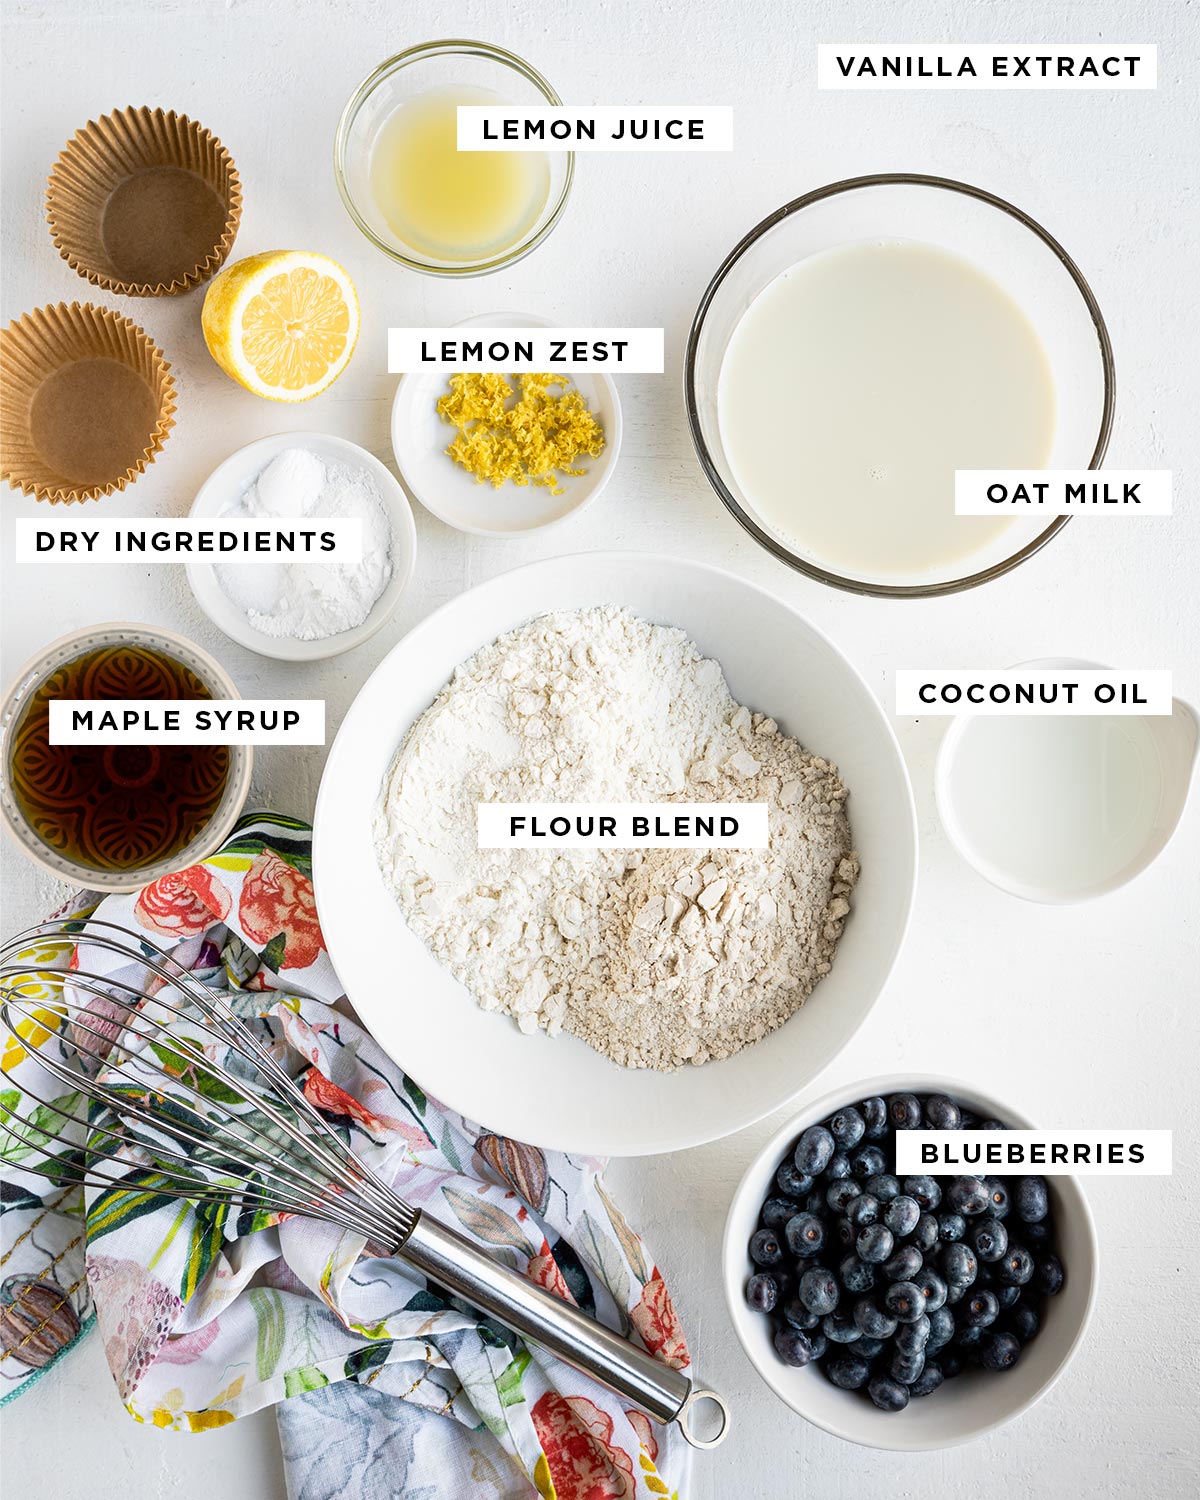 labeled ingredients for vegan muffins including lemon juice, vanilla extract, lemon zest, oat milk, dry ingredients, maple syrup, coconut oil, flour blend and blueberries.